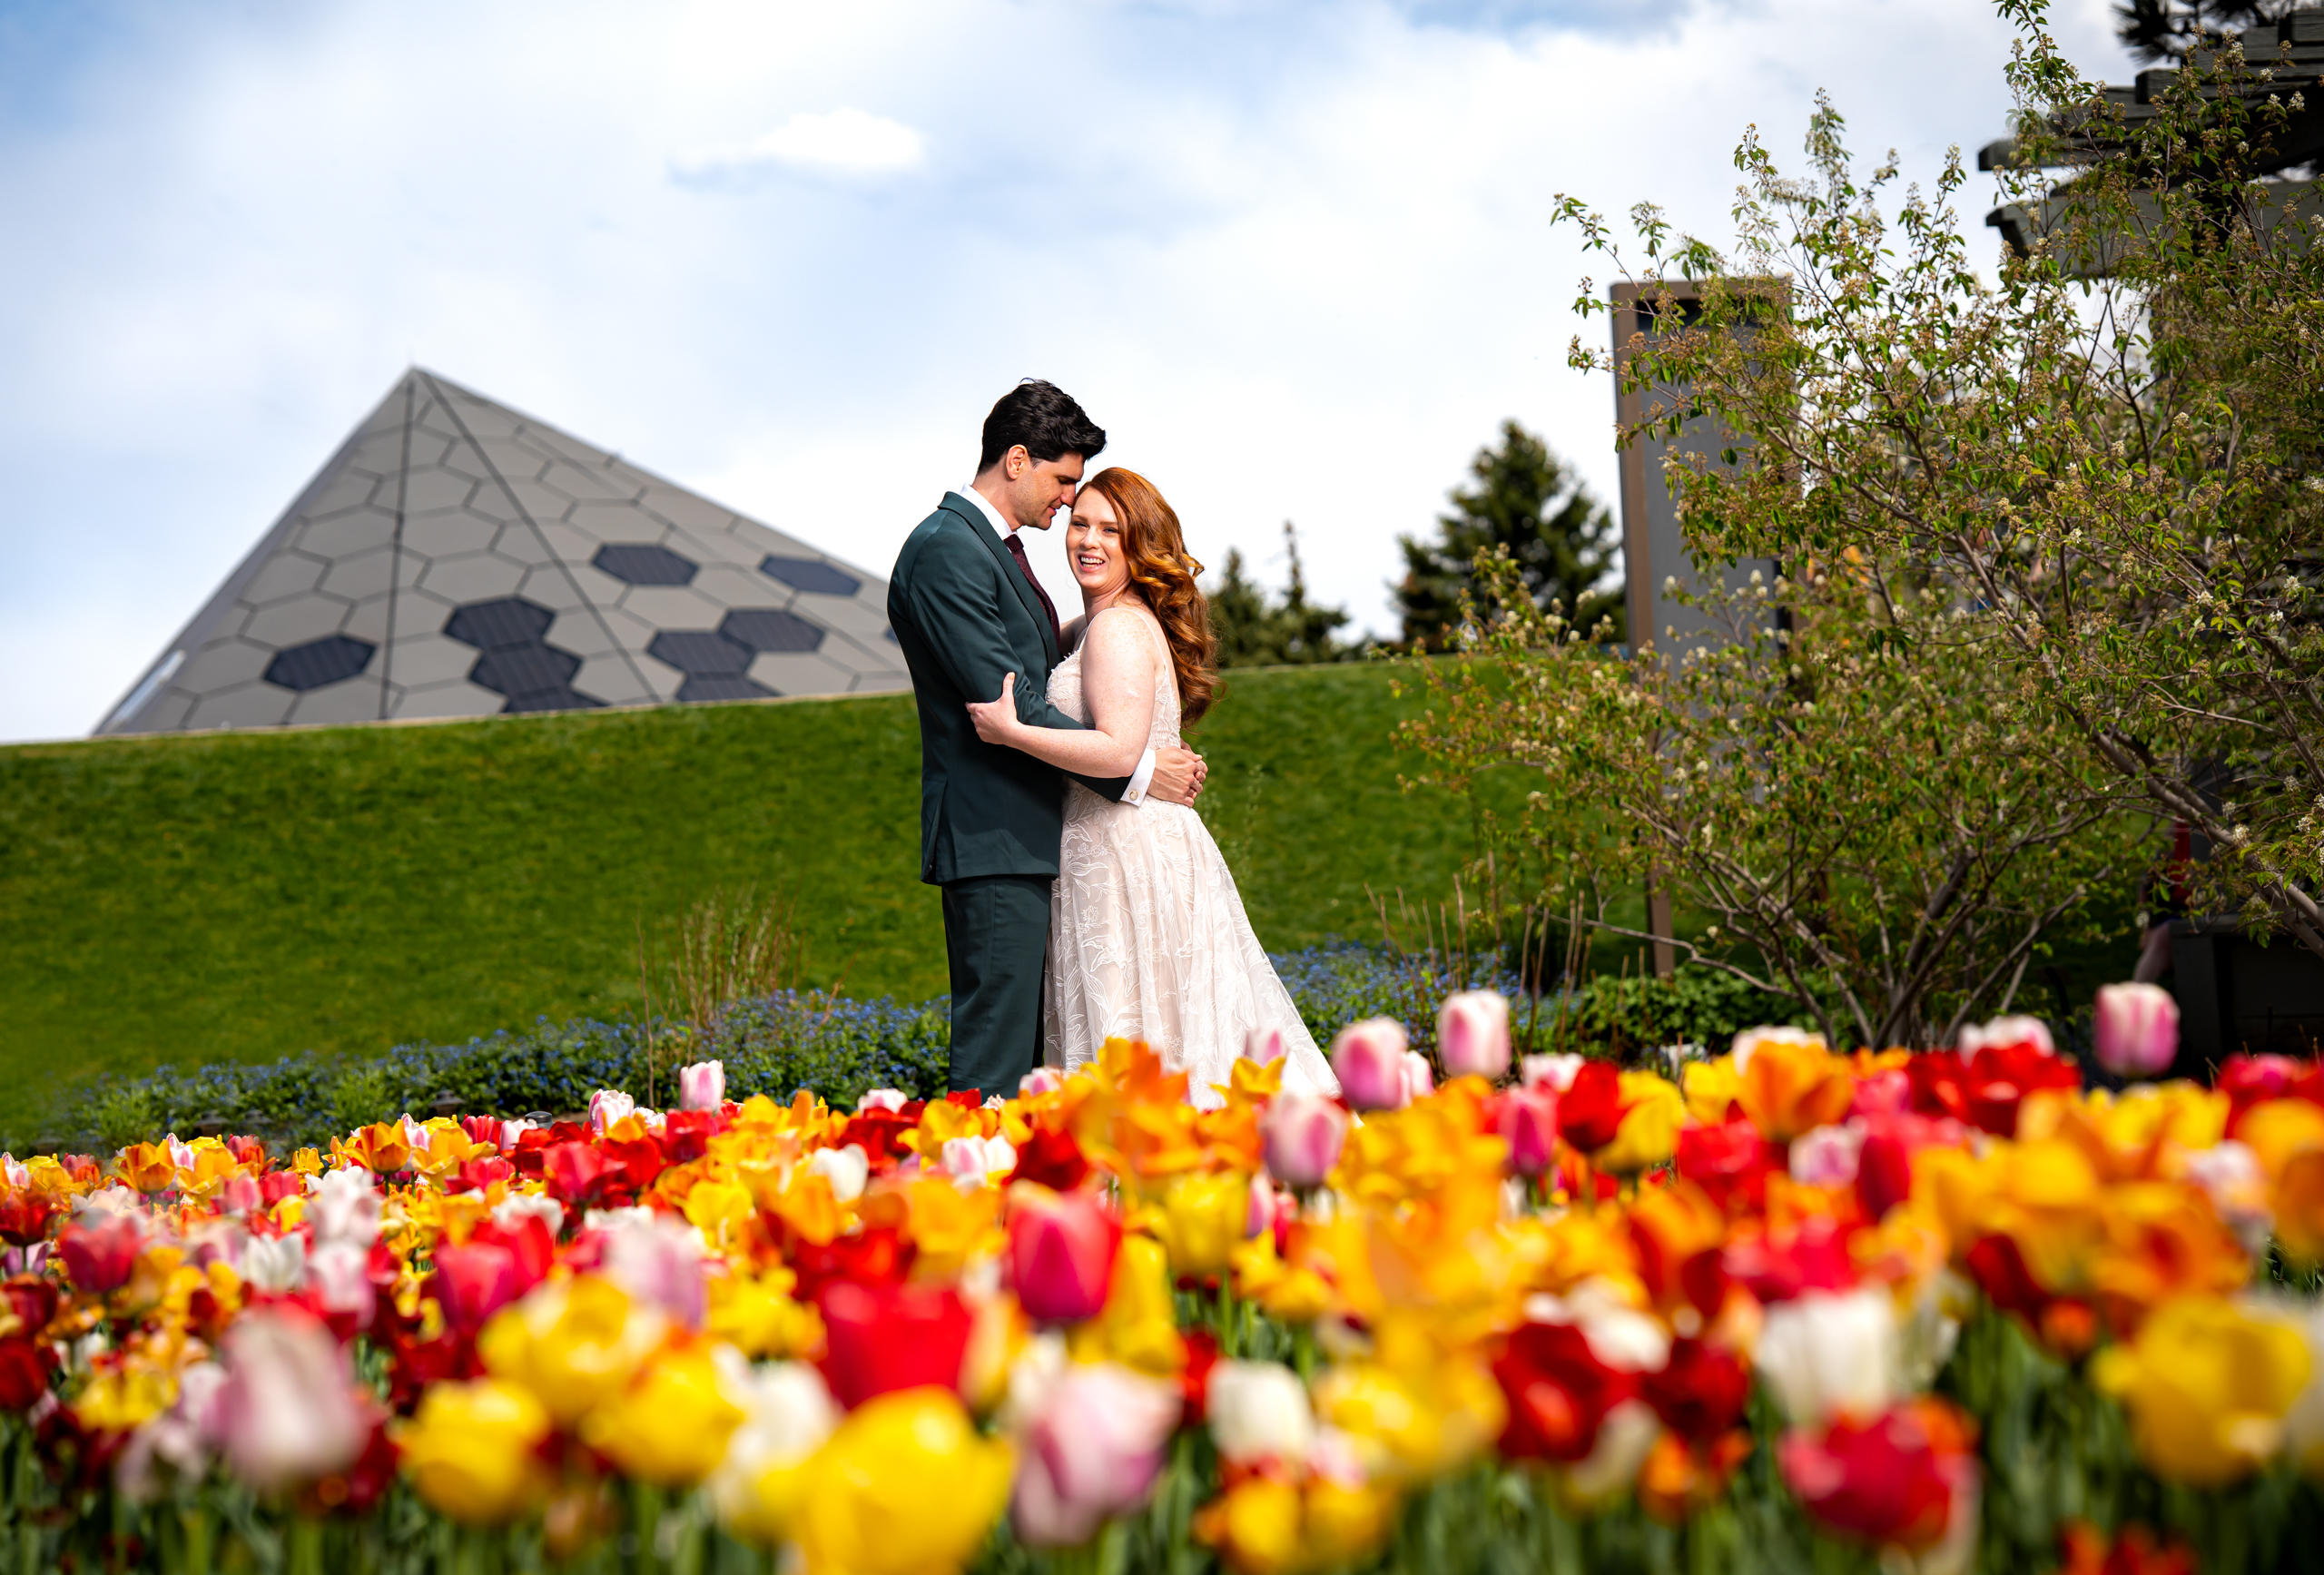 Bride and groom pose for portraits in a field of blossoming tulips in the spring gardens, wedding photos, wedding photography, wedding photographer, wedding photo inspiration, Denver Botanic Garden wedding, Denver Botanic Garden wedding photos, Denver Botanic Garden wedding photography, Denver Botanic Garden wedding inspiration, Denver wedding venue, Denver wedding photos, Denver wedding photography, Denver wedding photographer, Colorado wedding photography